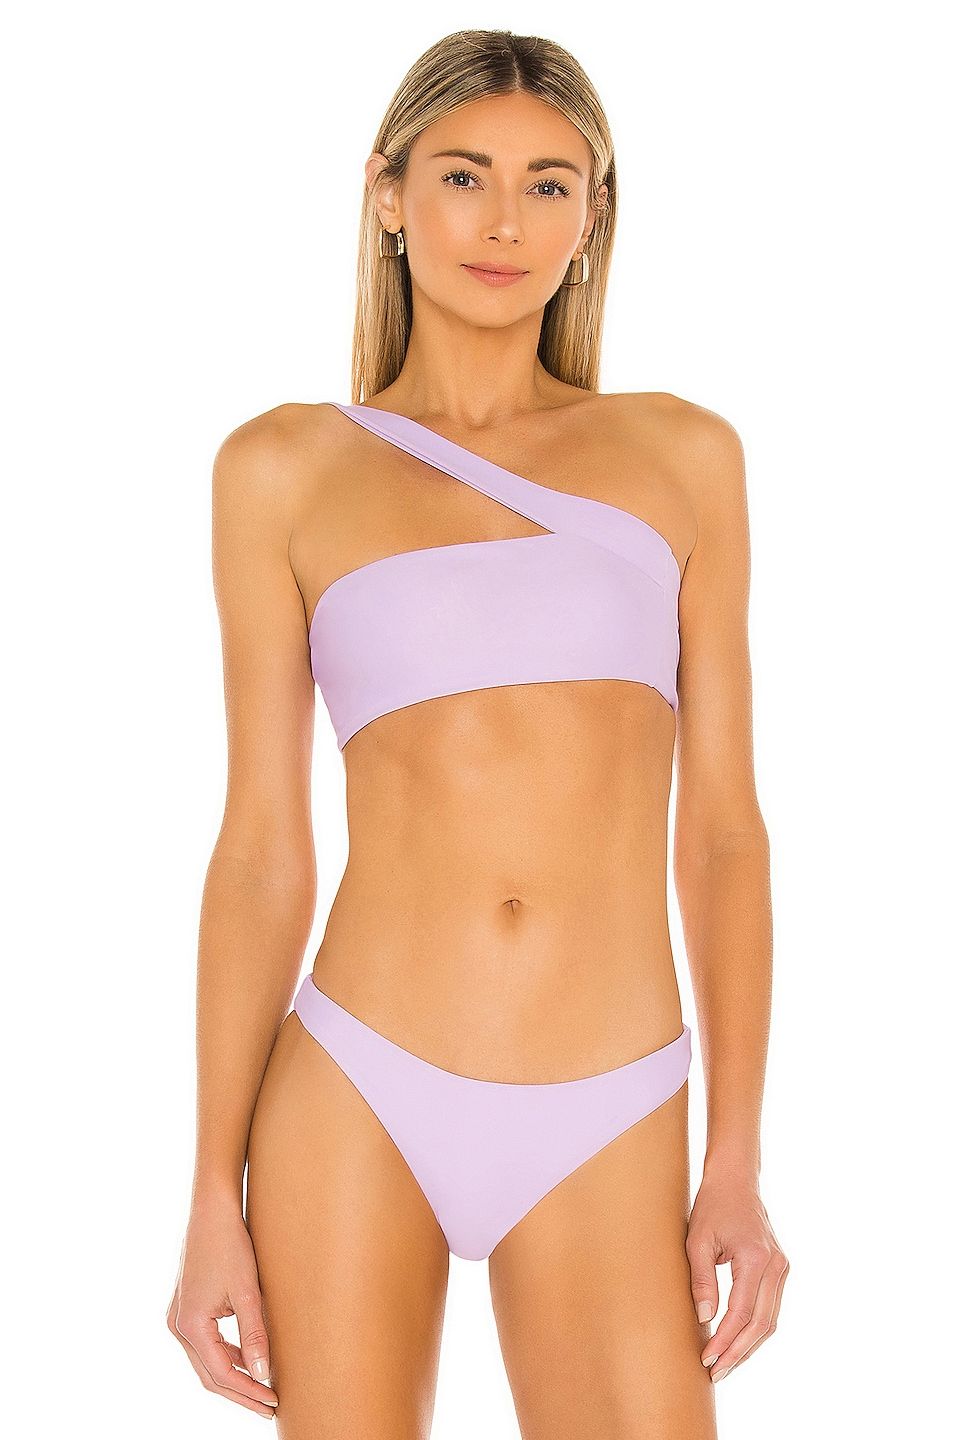 What is the best swimsuit style for a smaller-chested girl? - Quora